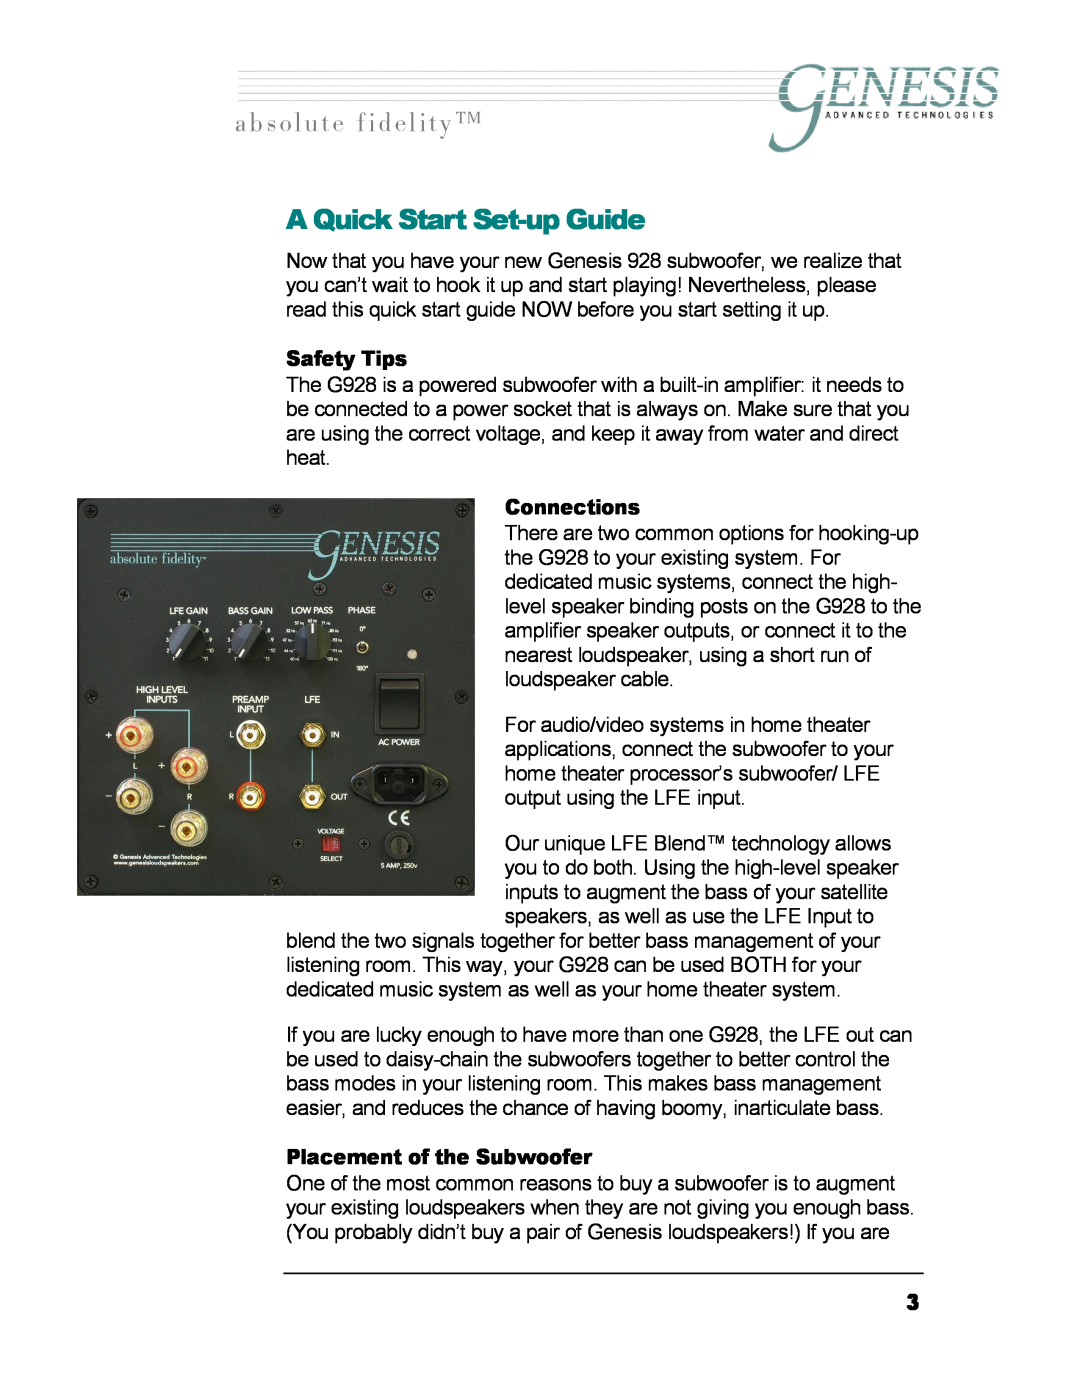 Genesis I.C.E 928 owner manual A Quick Start Set-upGuide, Safety Tips, Connections, Placement of the Subwoofer 